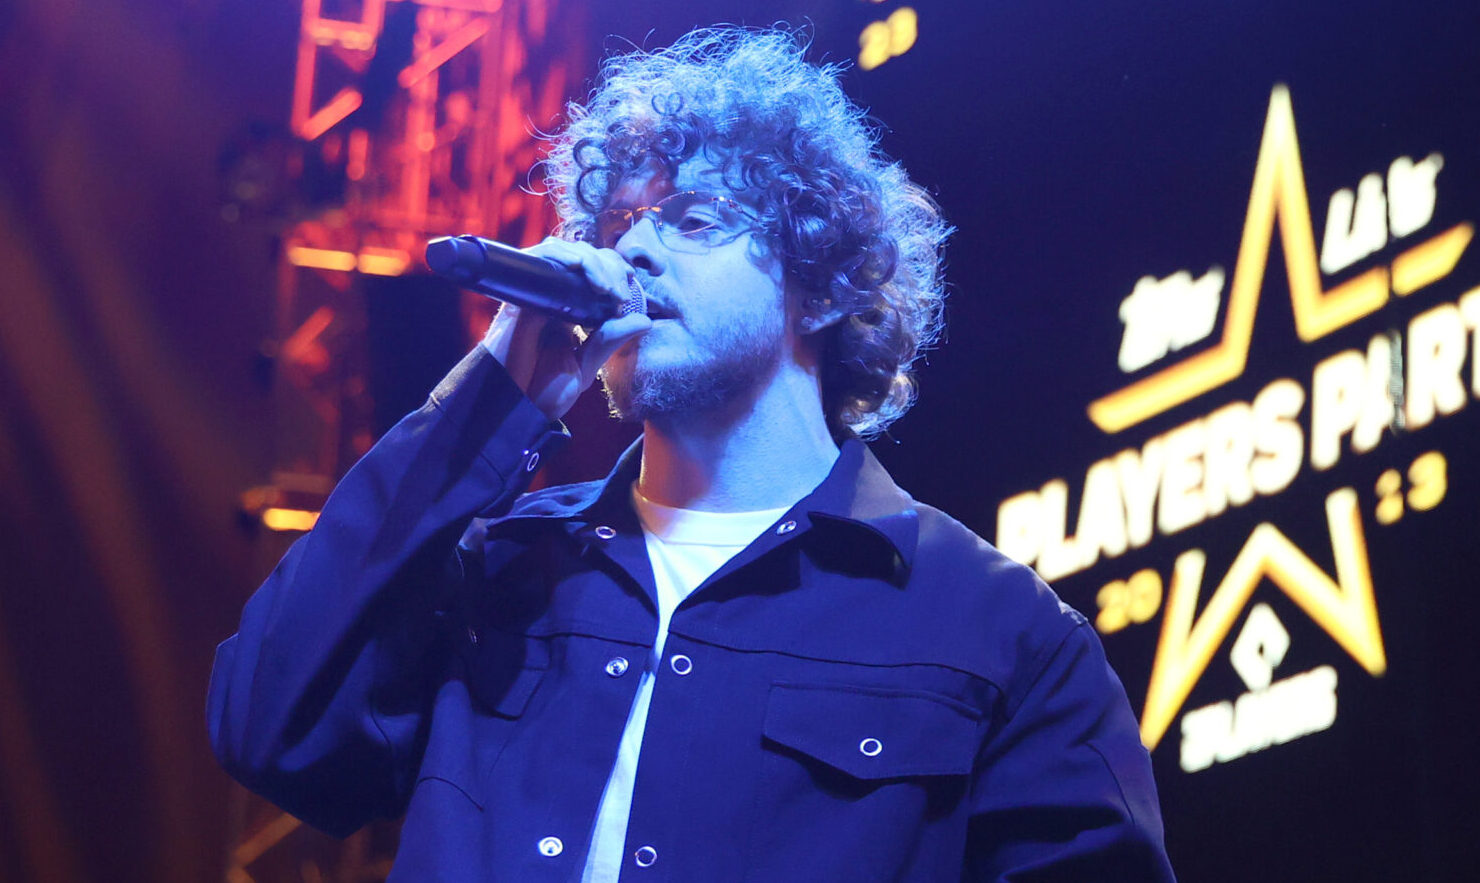 Super Bowl Halftime Show Shortlist Rumored To Include Jack Harlow